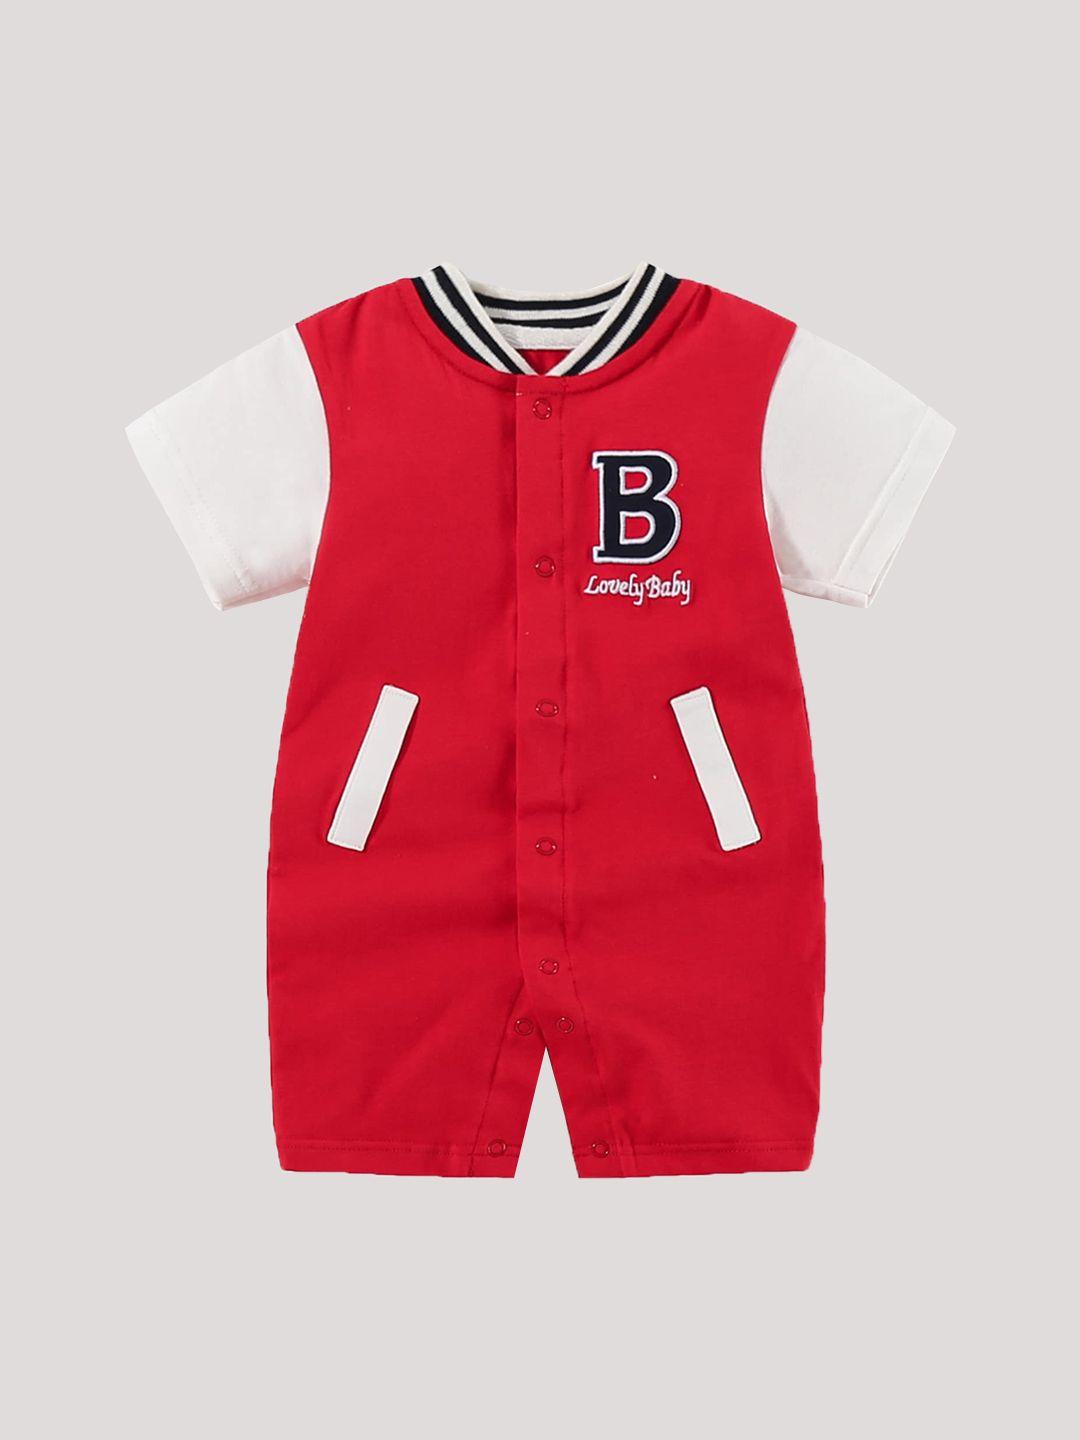 stylecast-infant-boys-red-printed-cotton-rompers